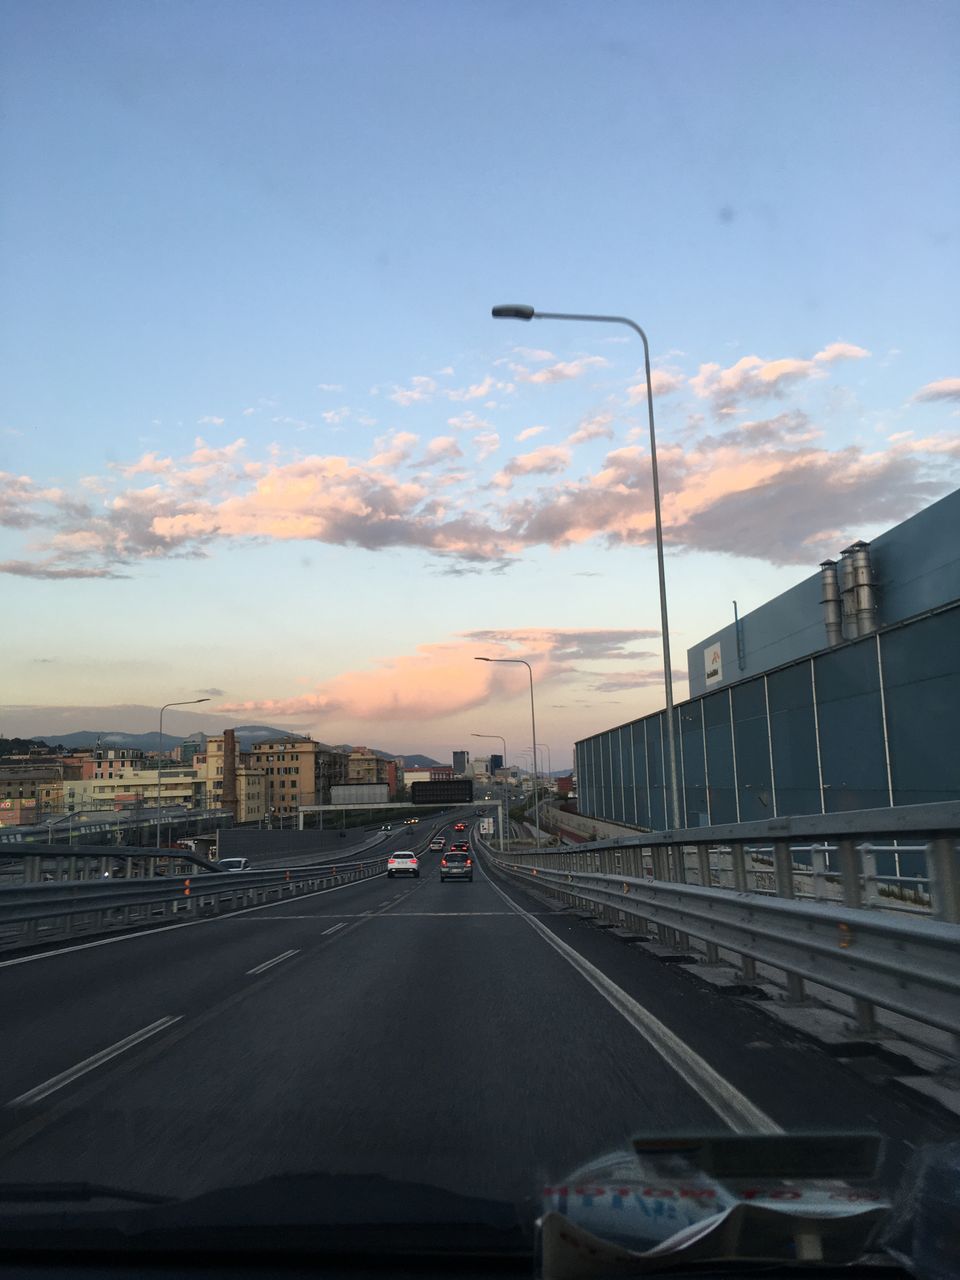 CARS ON ROAD AGAINST SKY AT SUNSET